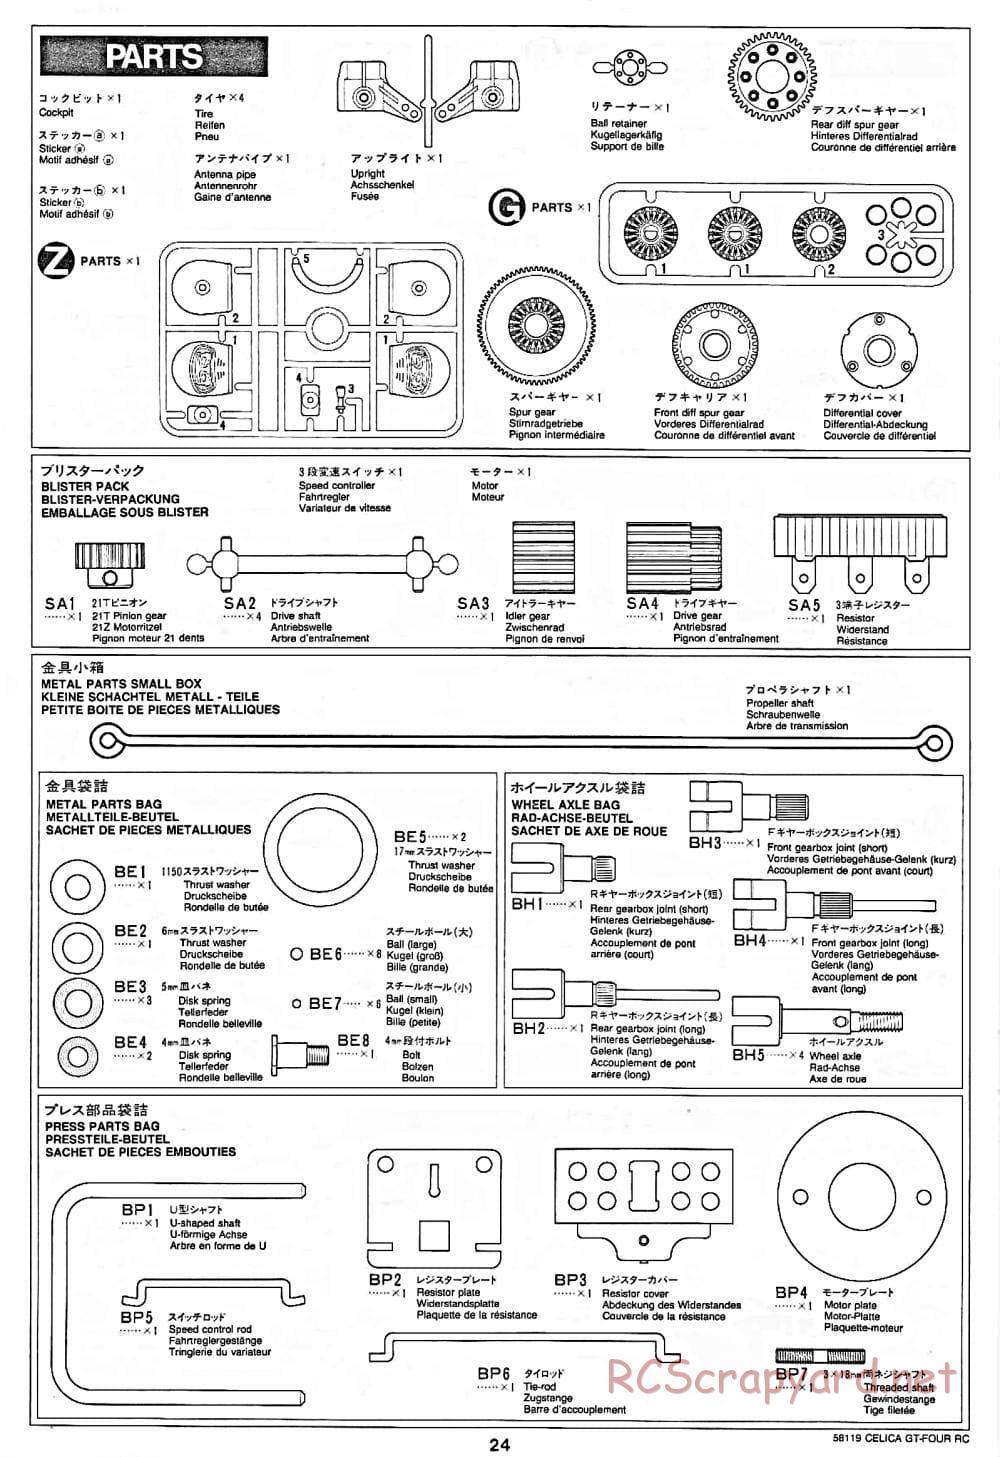 Tamiya - Toyota Celica GT-Four RC - TA-01 Chassis - Manual - Page 24